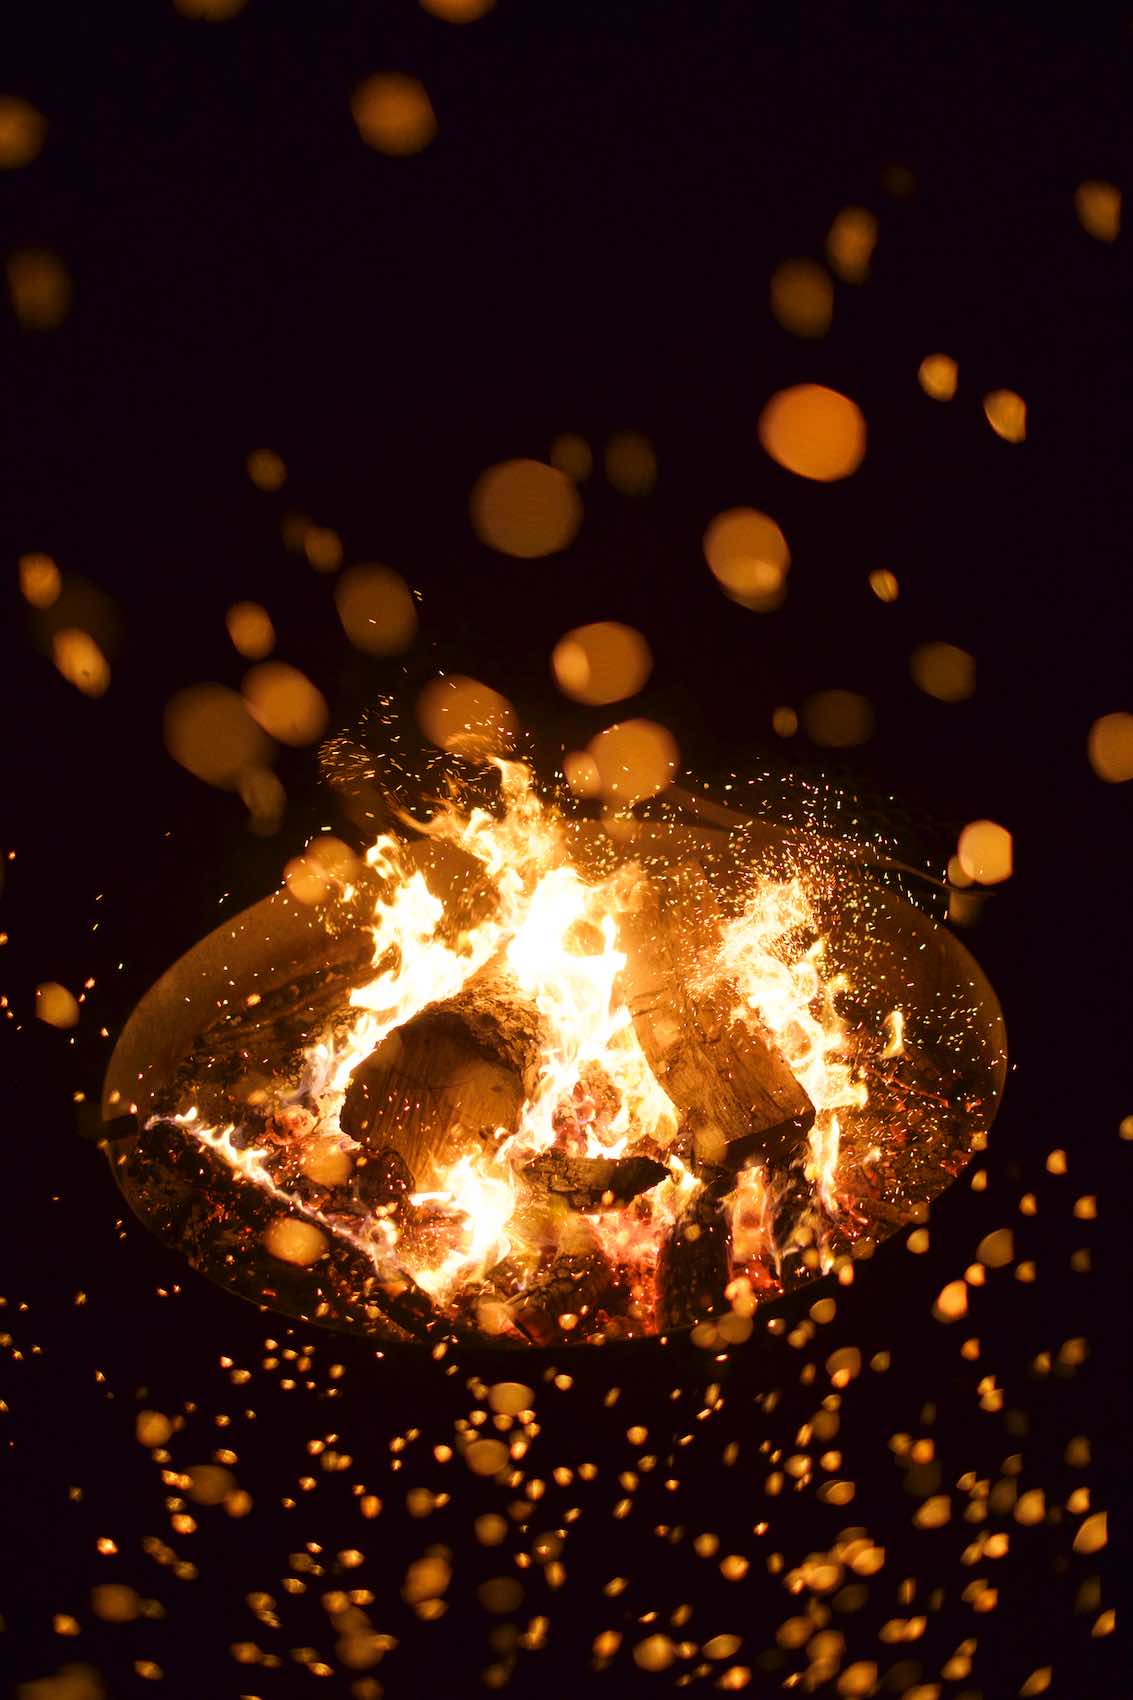 Jody Horton Photography - Wood fire and sparks.